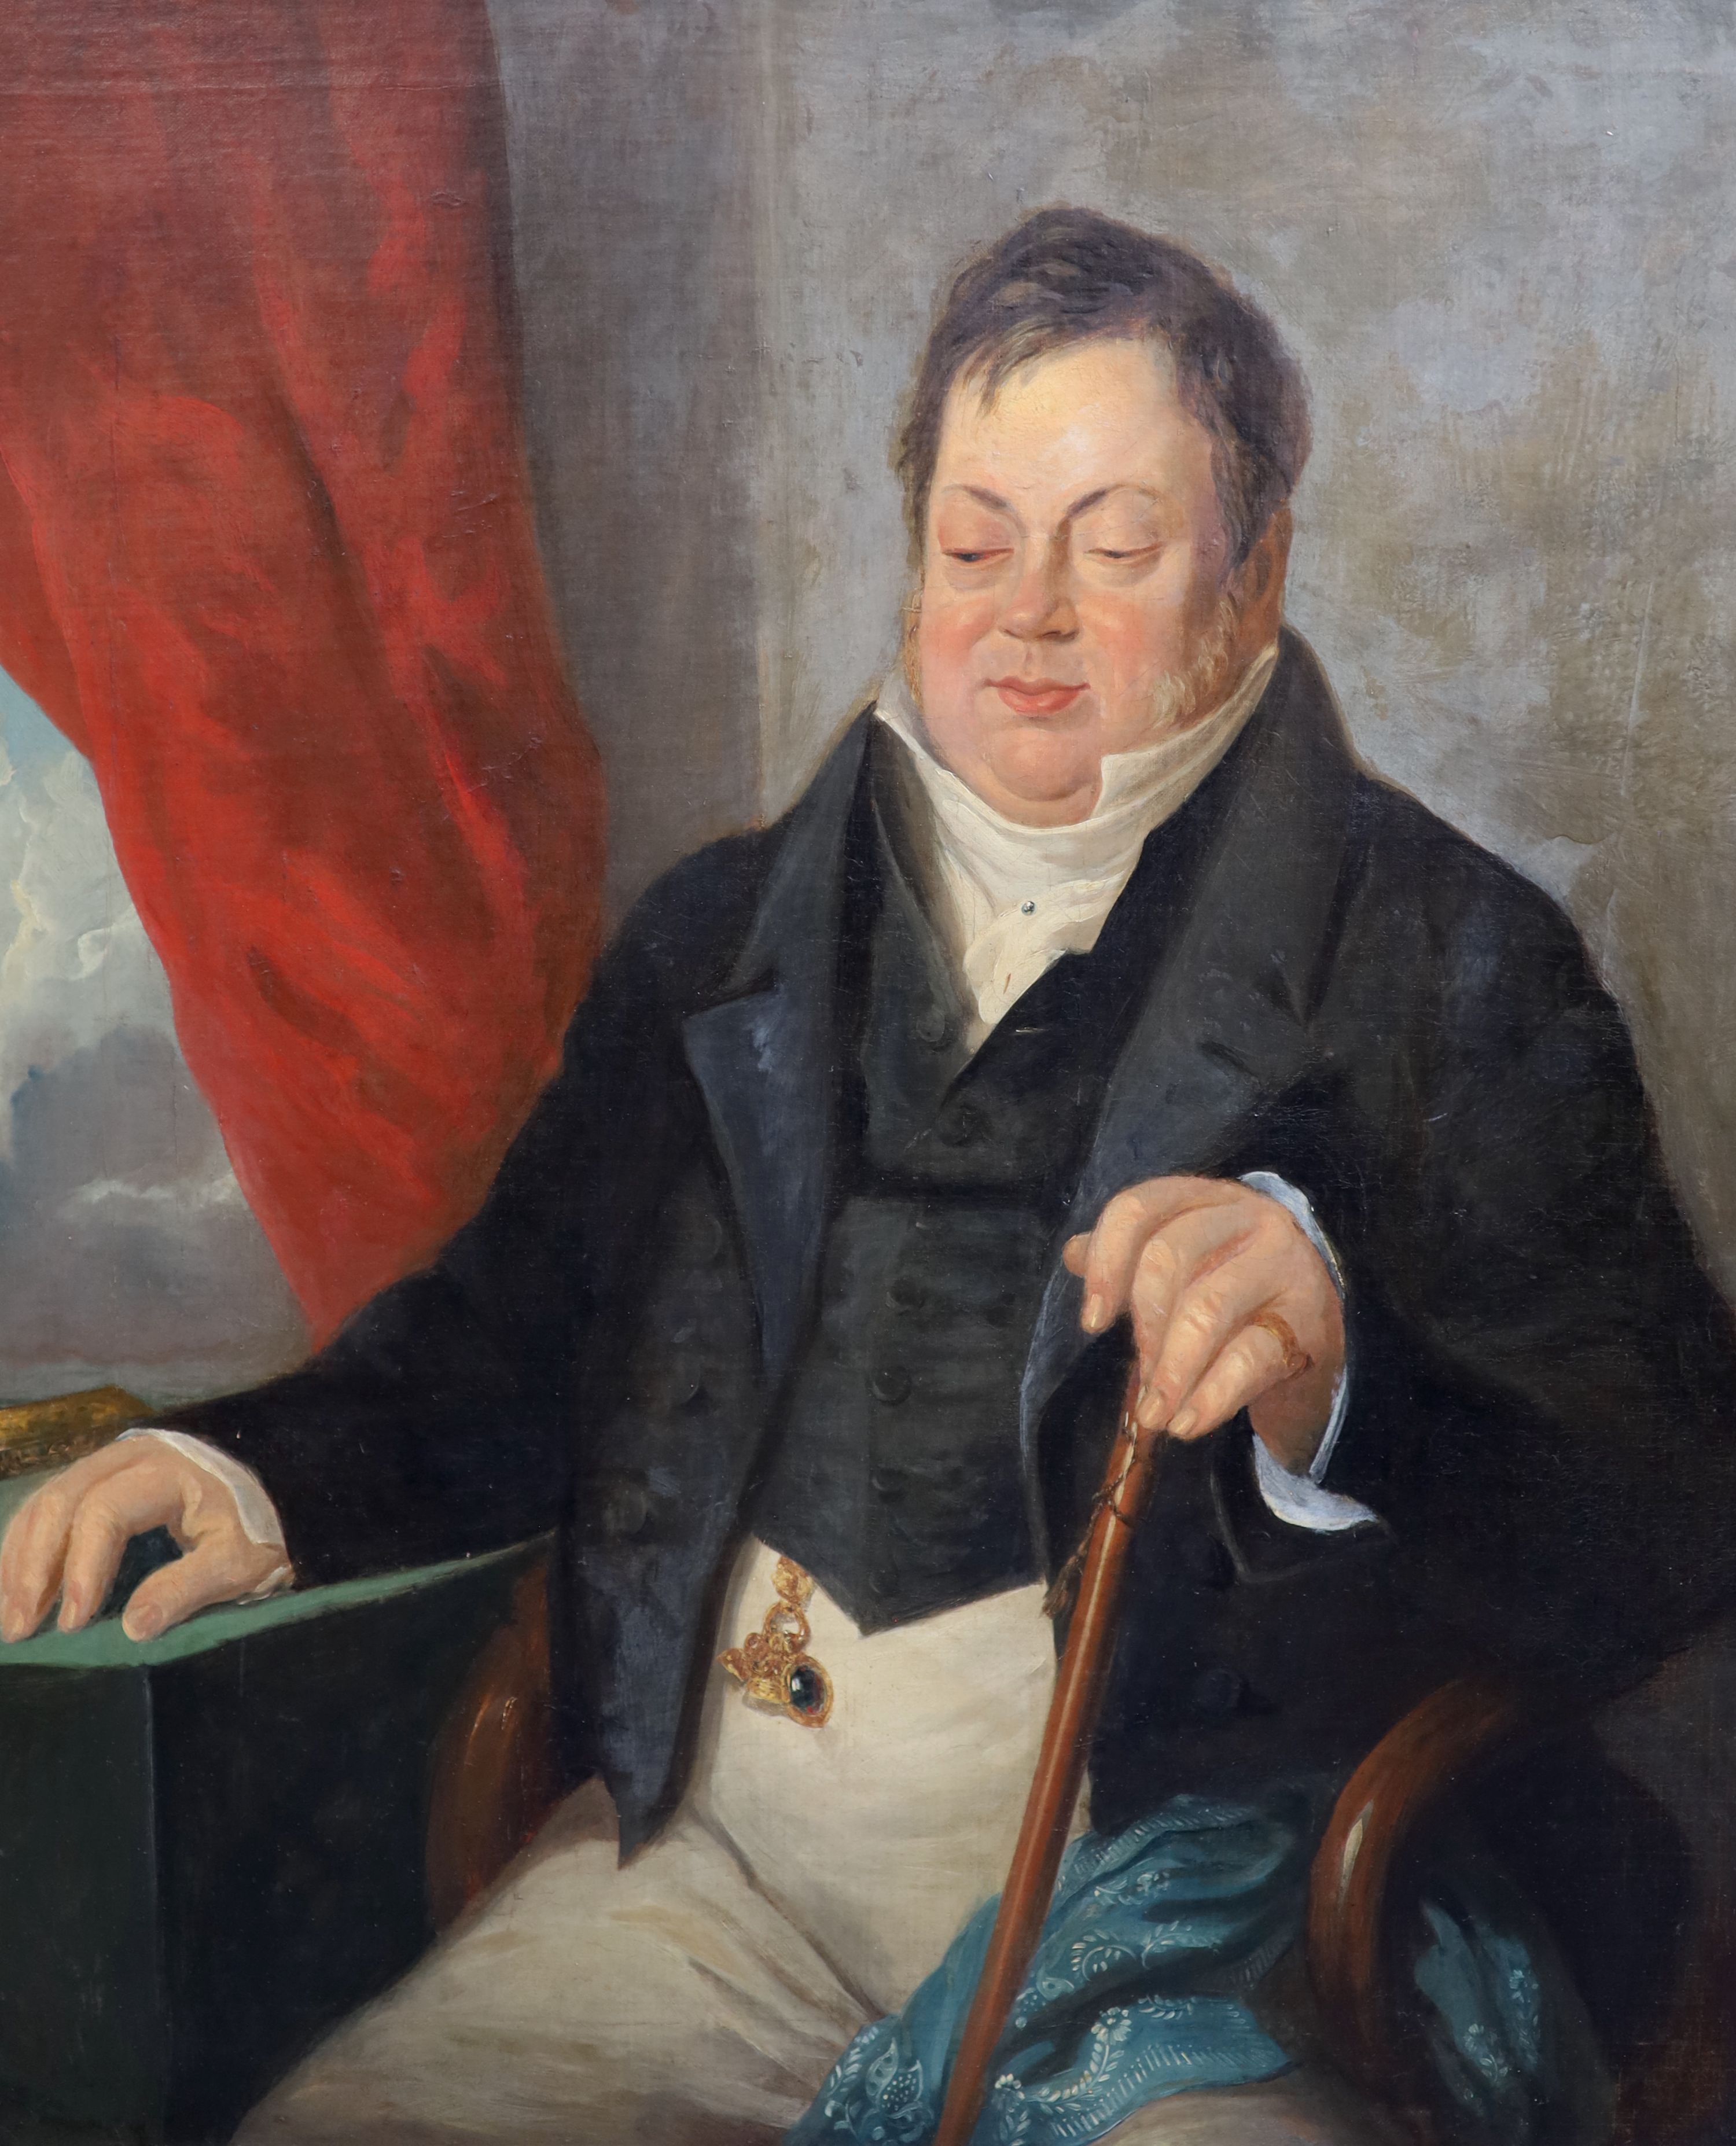 Attributed to Benjamin Marshall (1767-1848), Portrait of a seated portly gentleman, by repute, Samuel Vale (1797-1835), oil on canvas, 76 x 62.25cm